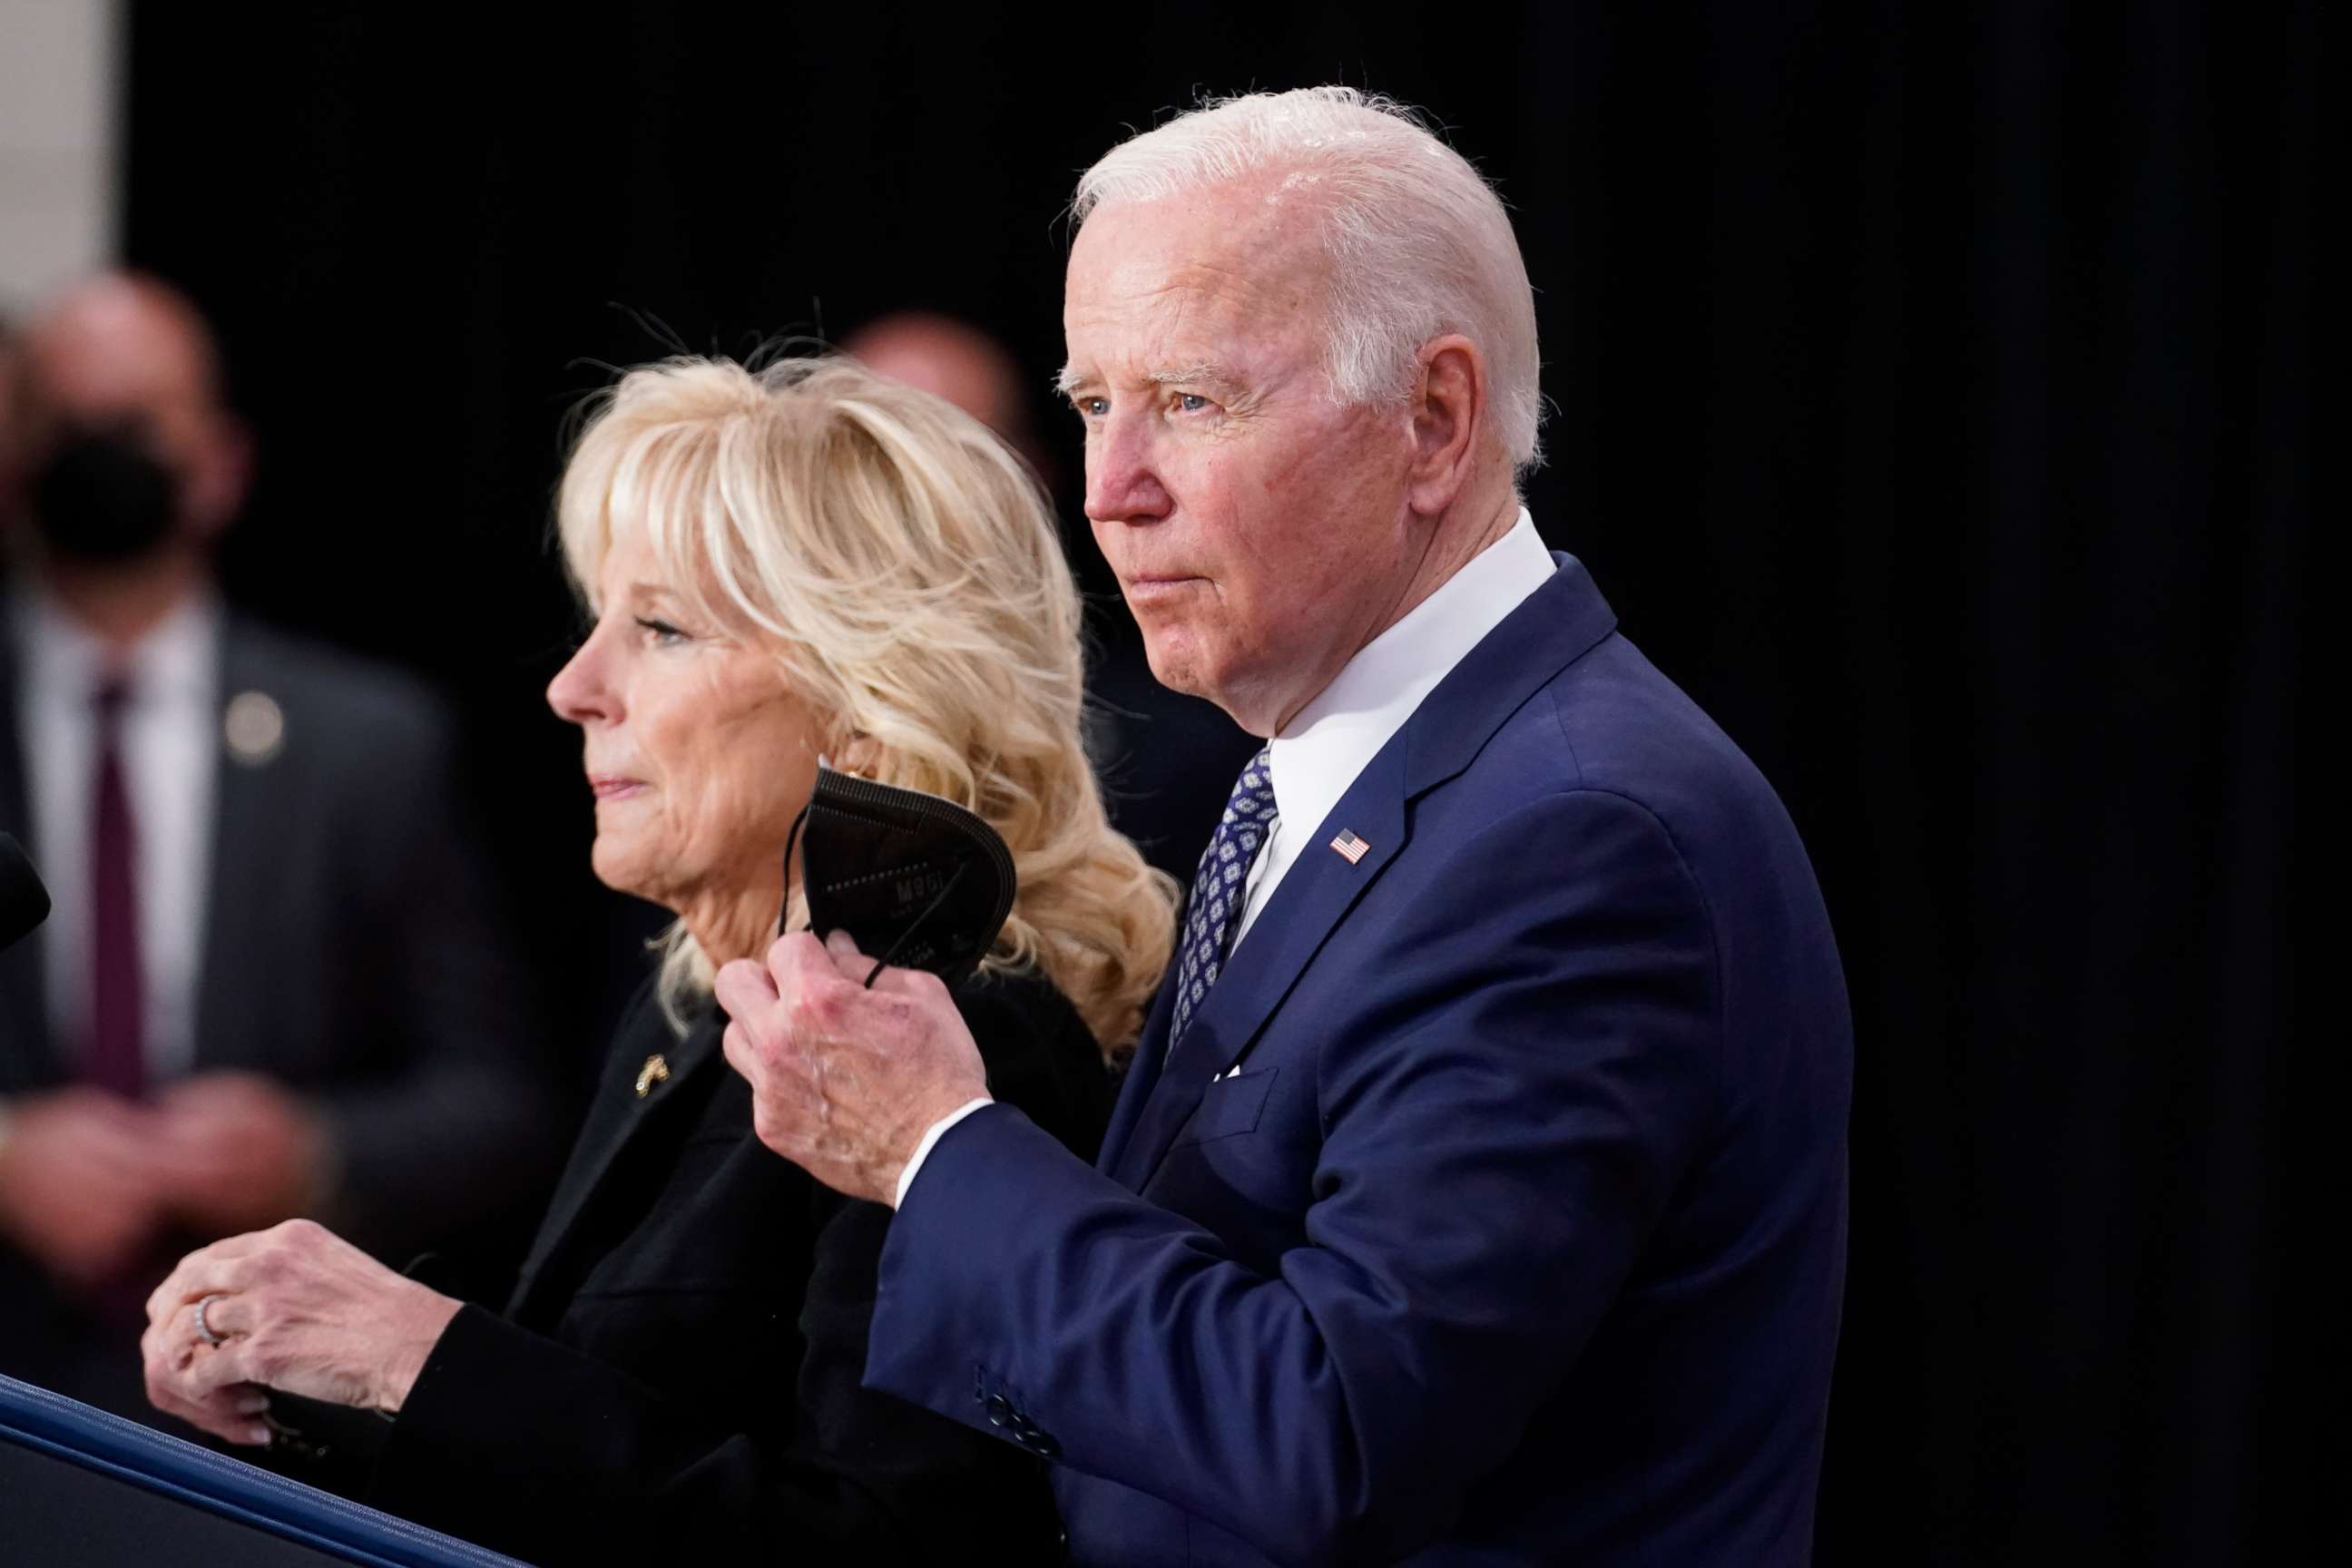 PHOTO: President Joe Biden stands with first lady Jill Biden to speak to families of victims of Saturday's shooting, law enforcement and first responders, and community leaders at the Delavan Grider Community Center in Buffalo, N.Y., May 17, 2022.